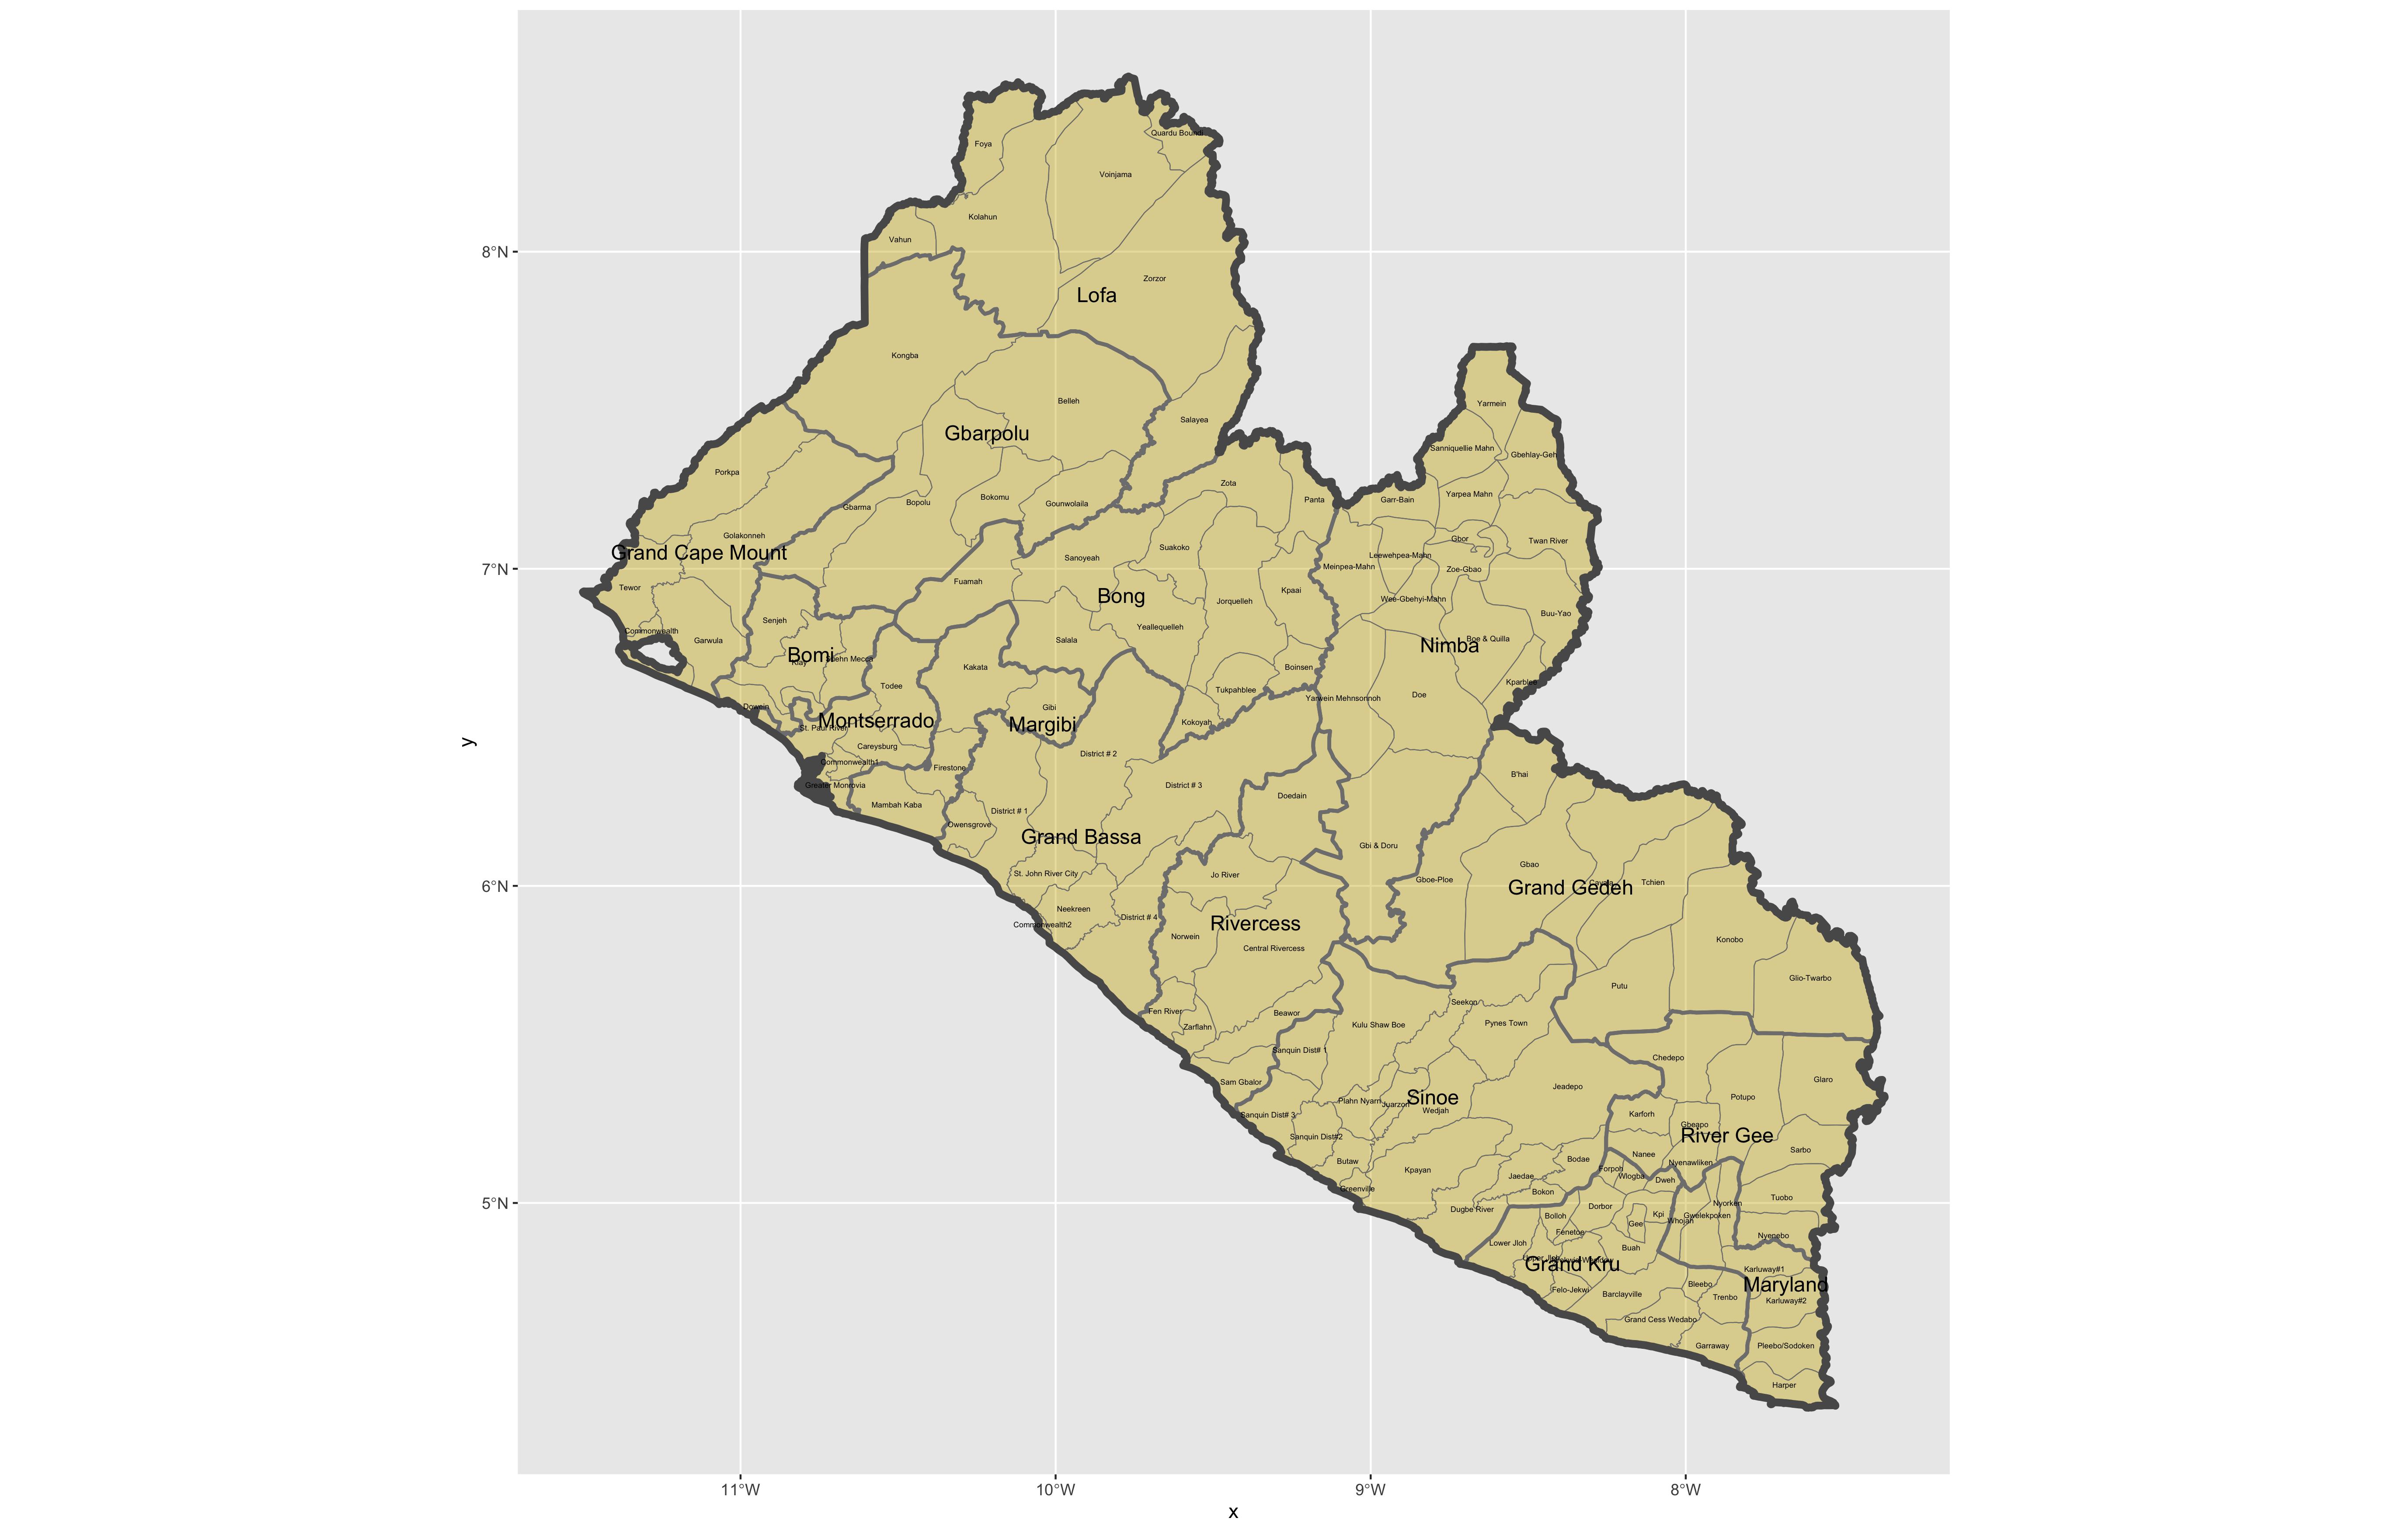 Liberia, its counties and districts